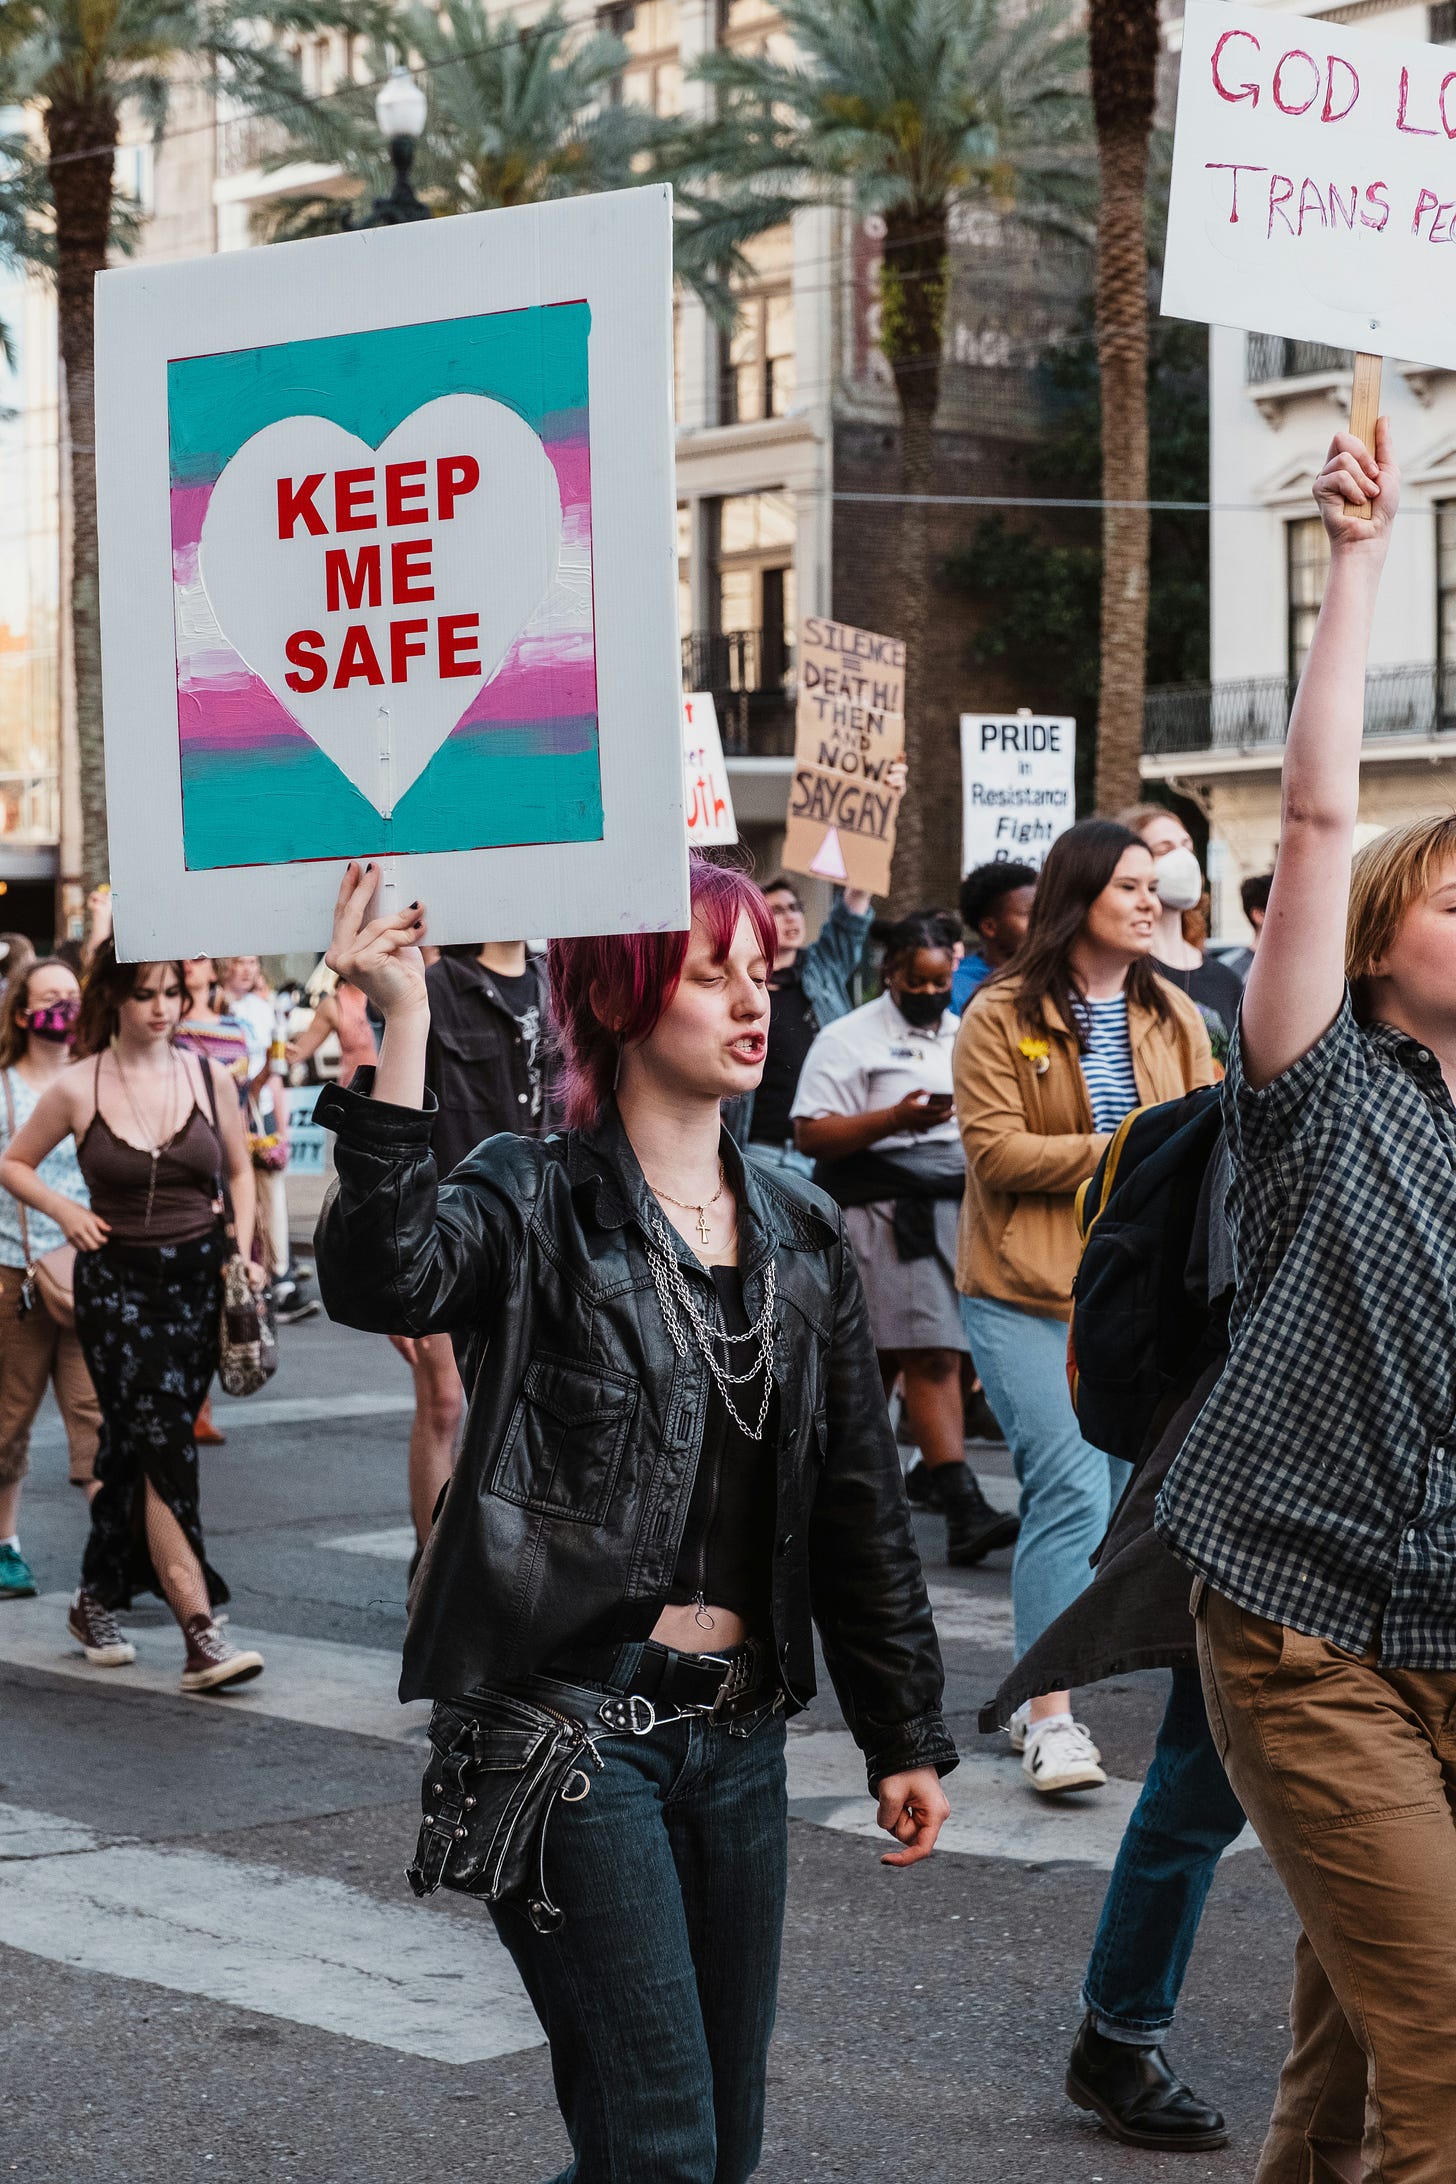 A person with red hair holding up a sign that reads "KEEP ME SAFE" with a heart symbol during a protest march, with other demonstrators and signs in the background.